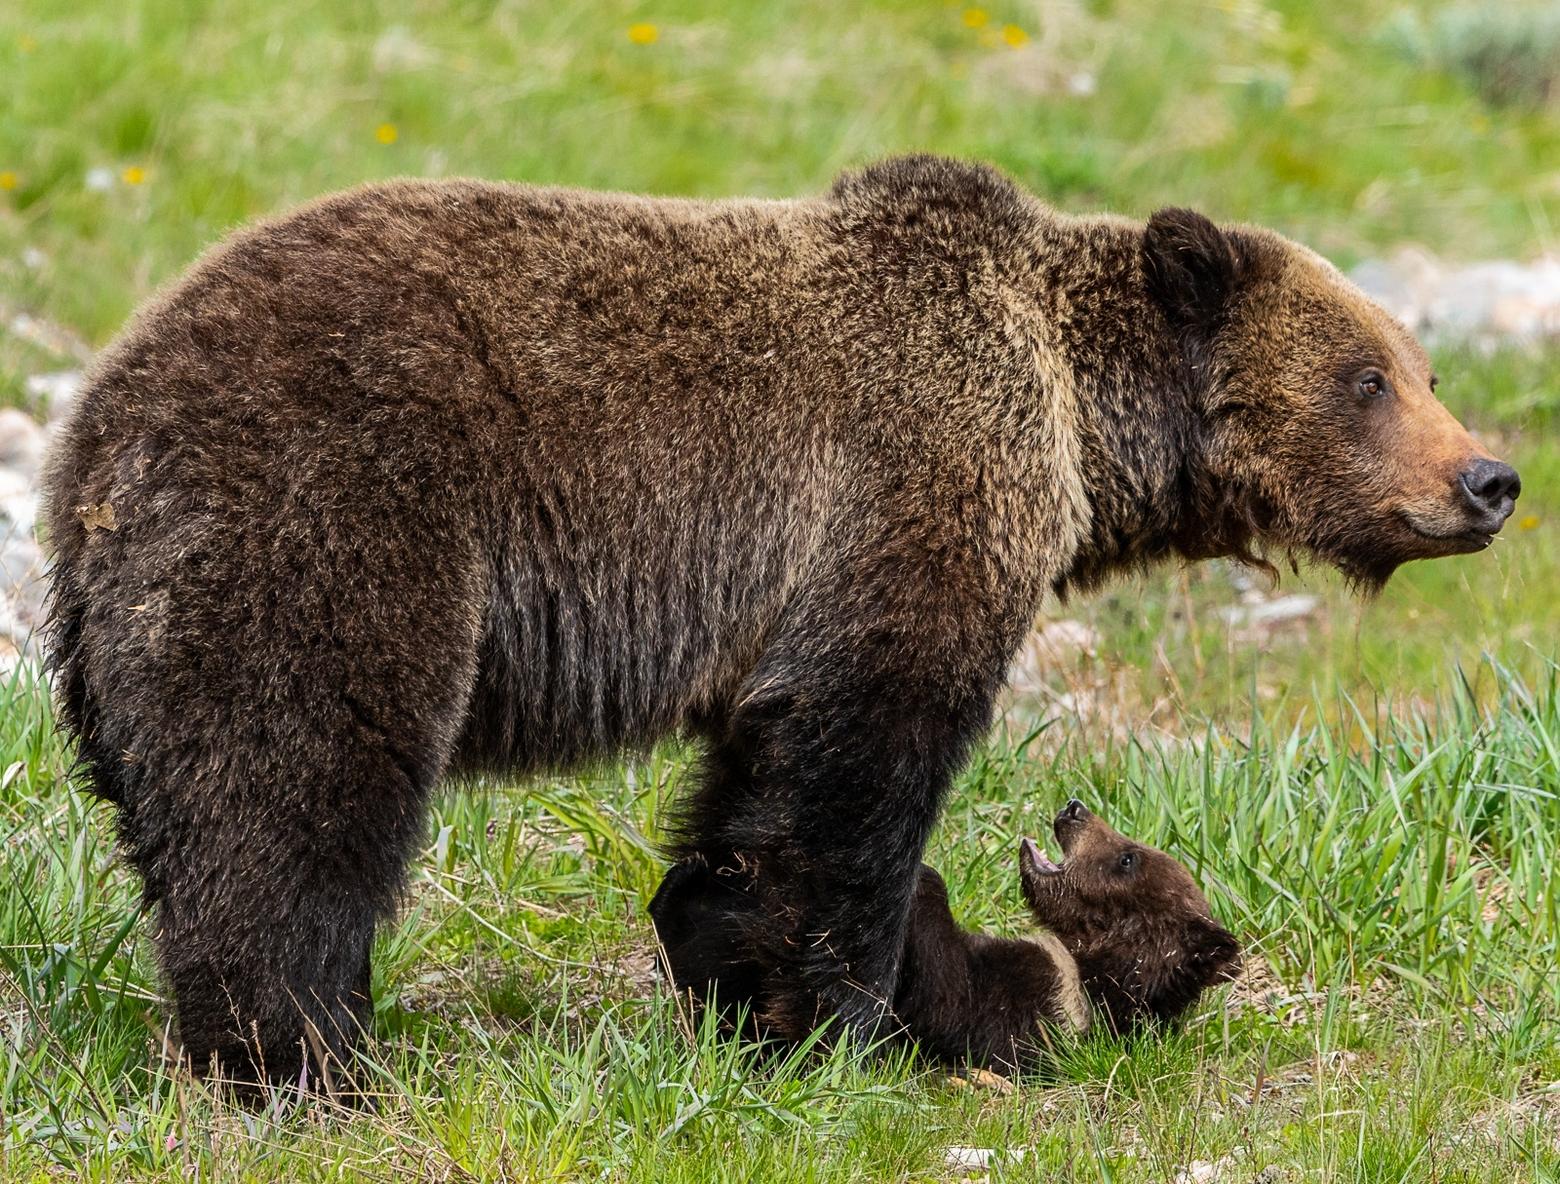 Sow grizzlies near Grand Teton National Park often spend time near the road to keep their cubs safe from large male bears. This sow was photographed near Togwatee Pass and is a descendant of Grizzly 399. Photo by Howie Garber